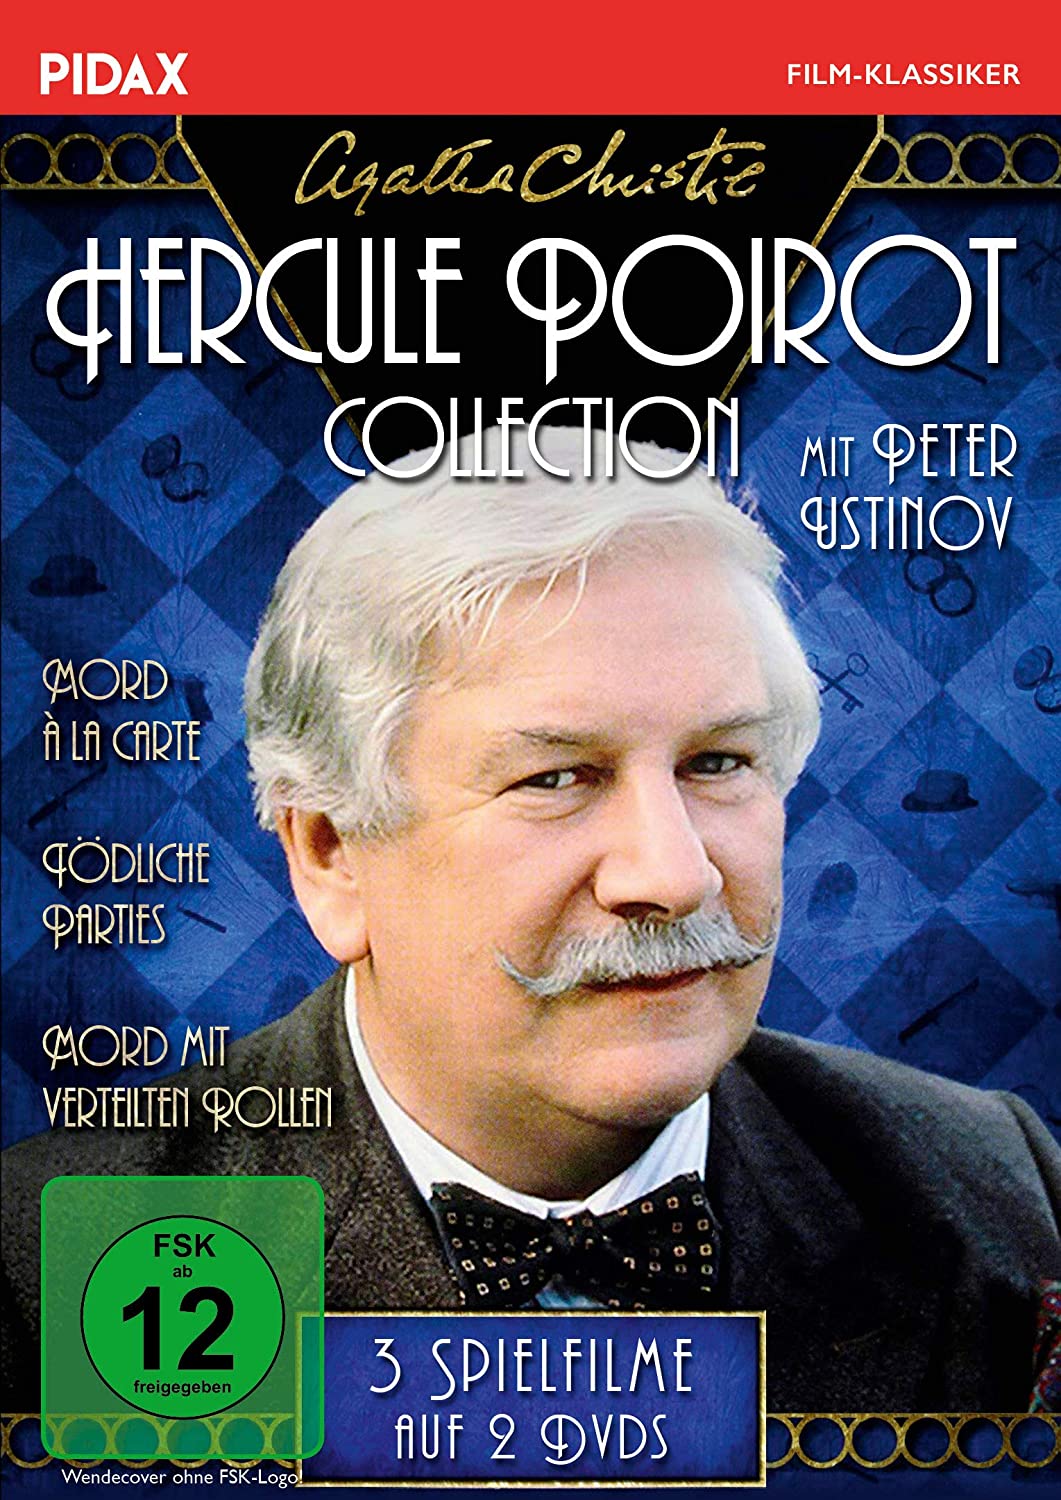 Agatha Christie: Hercule Poirot-Collection, Peter Ustinov